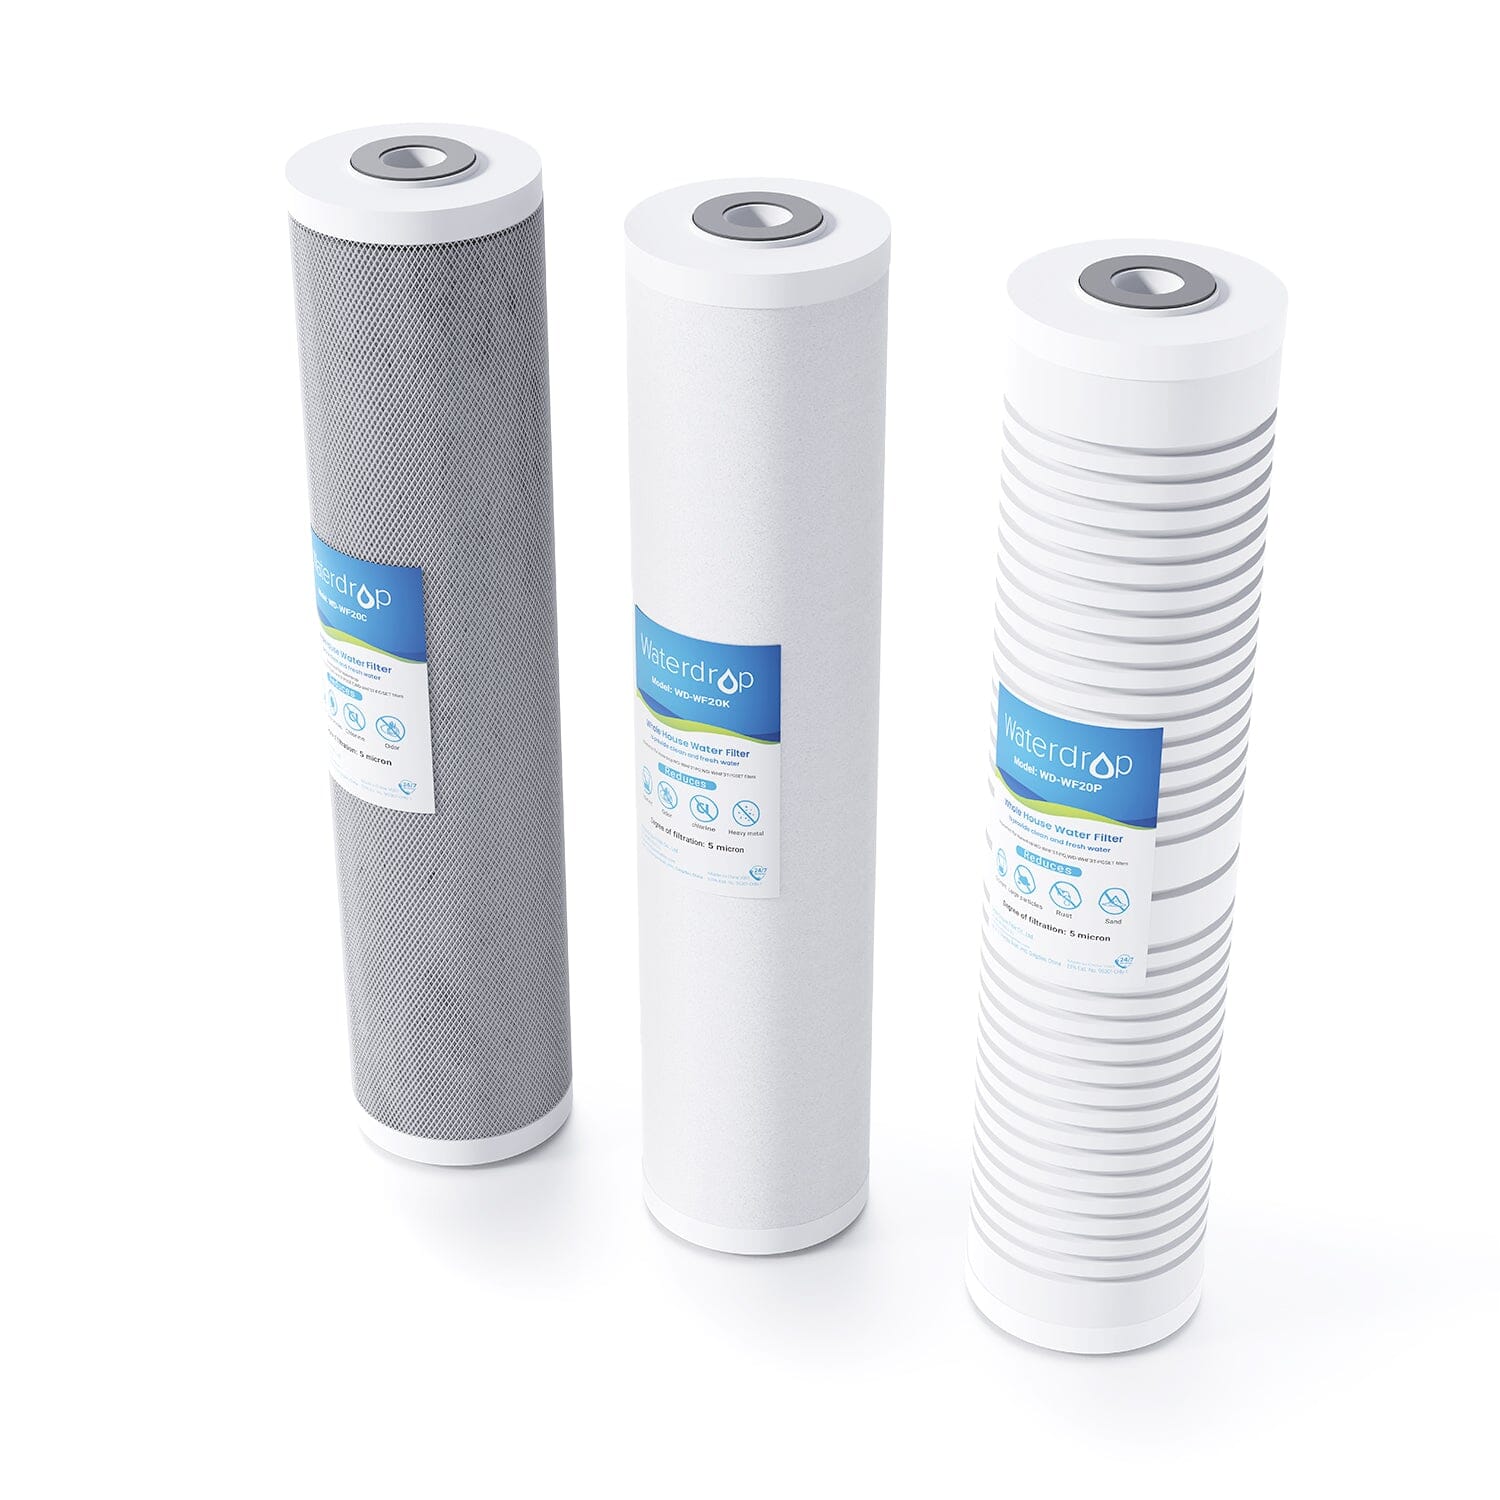 Waterdrop Whole House Water Filter, Replacement for WD-WF20PG